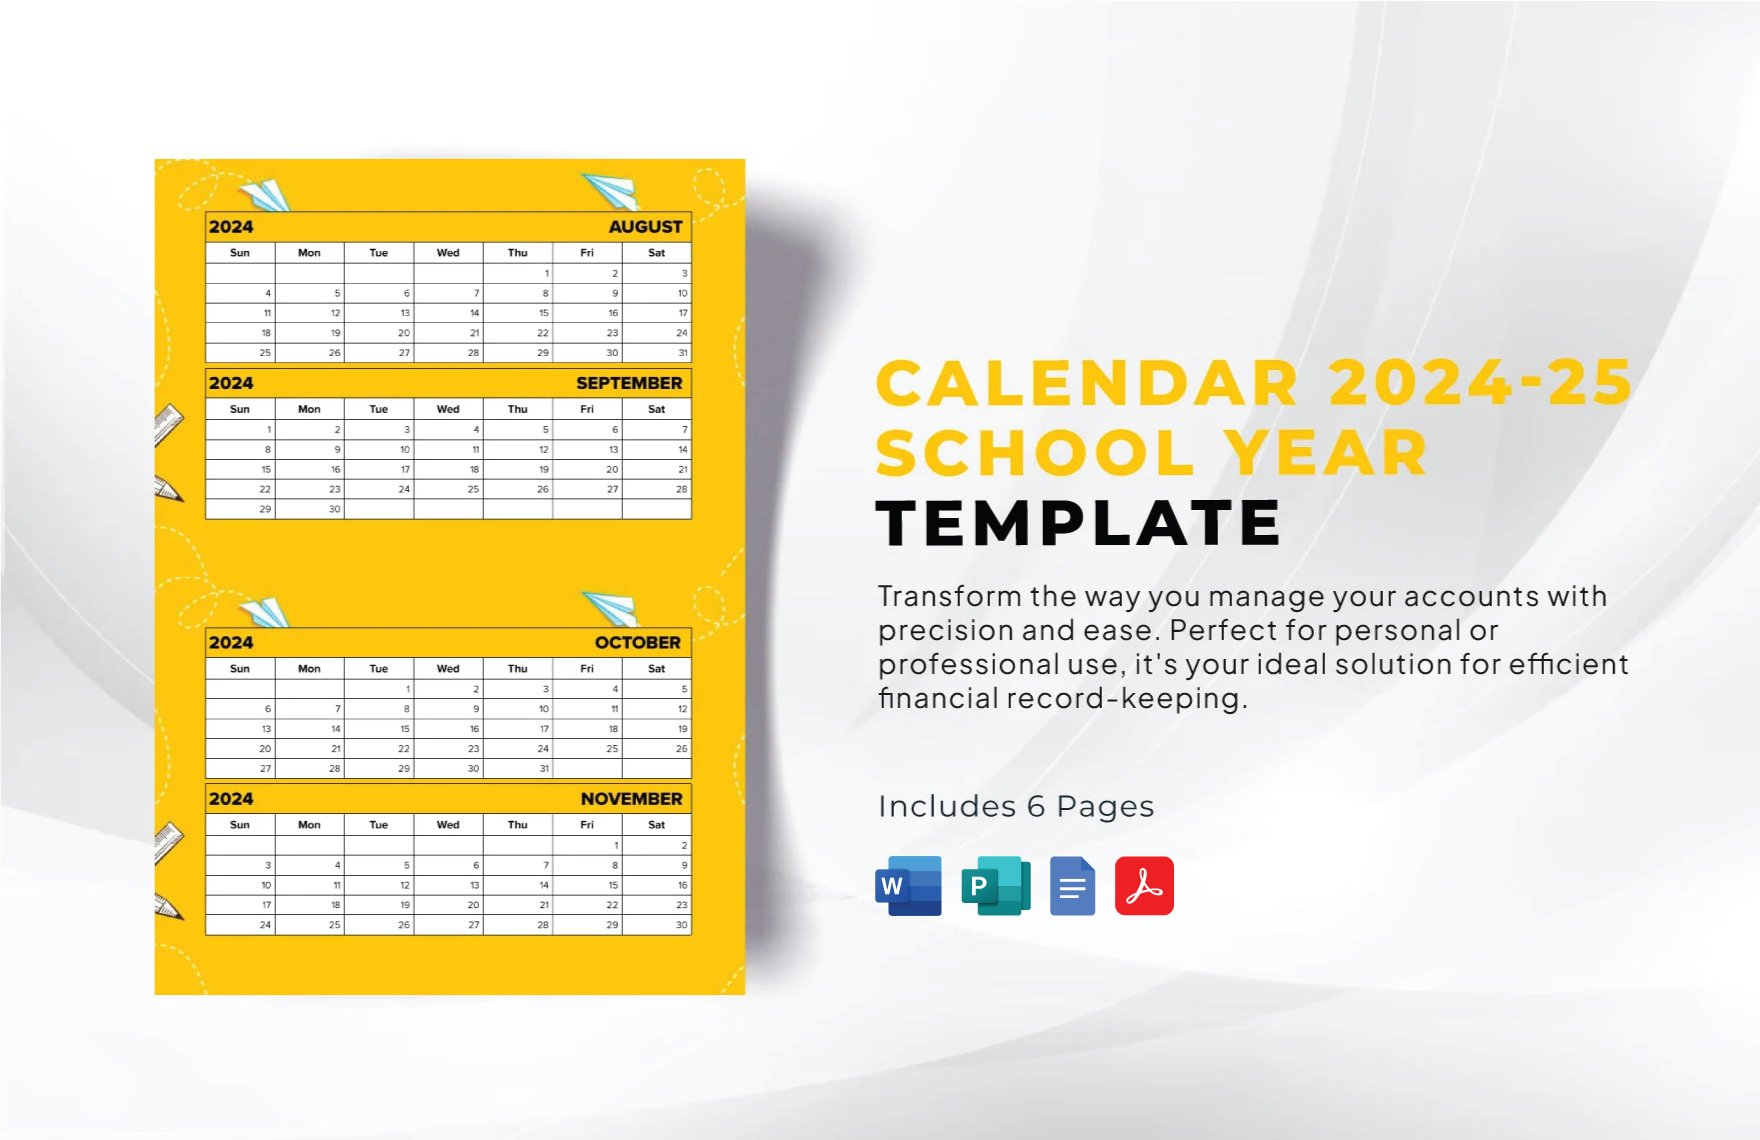 Calendar 2024-25 School Year Template in Word, Google Docs, PDF, Publisher, InDesign